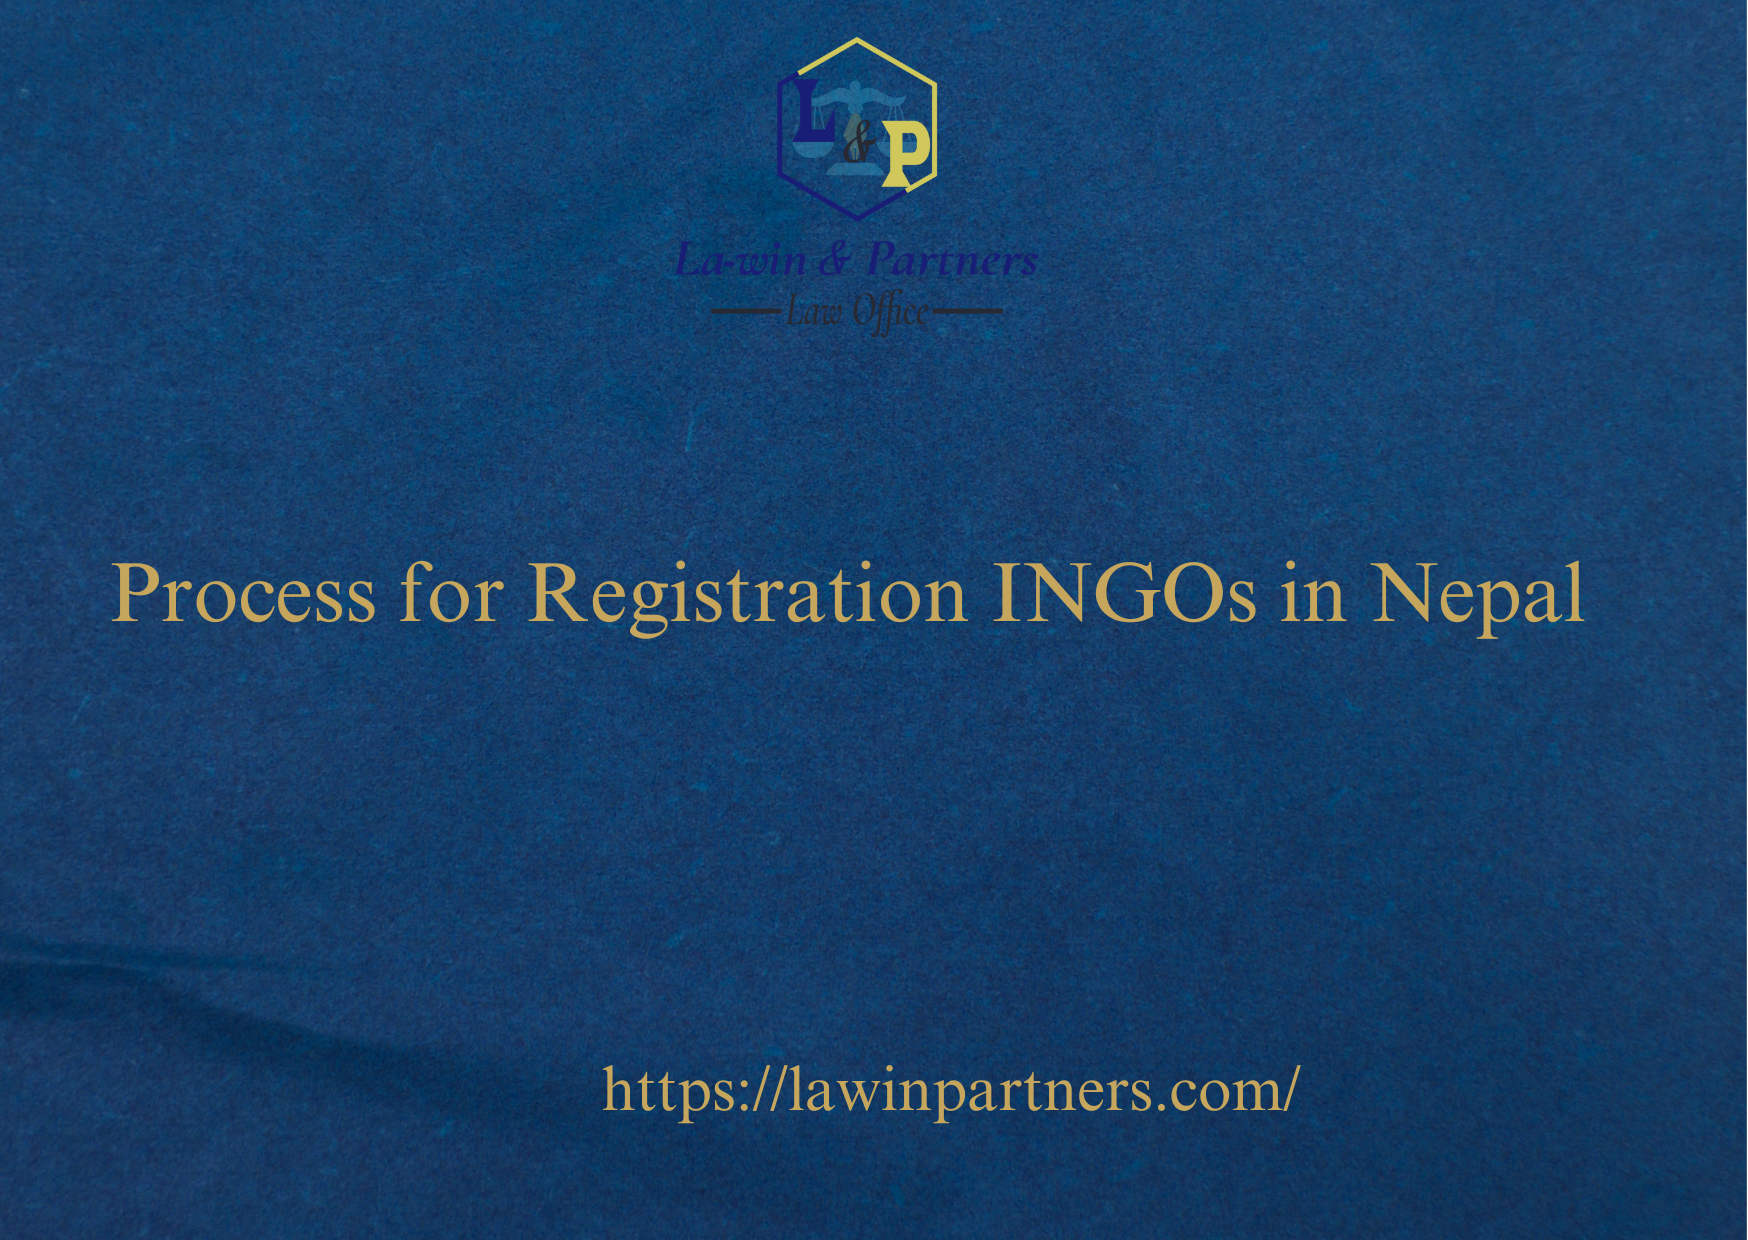 Process of Registration of INGOs in Nepal 